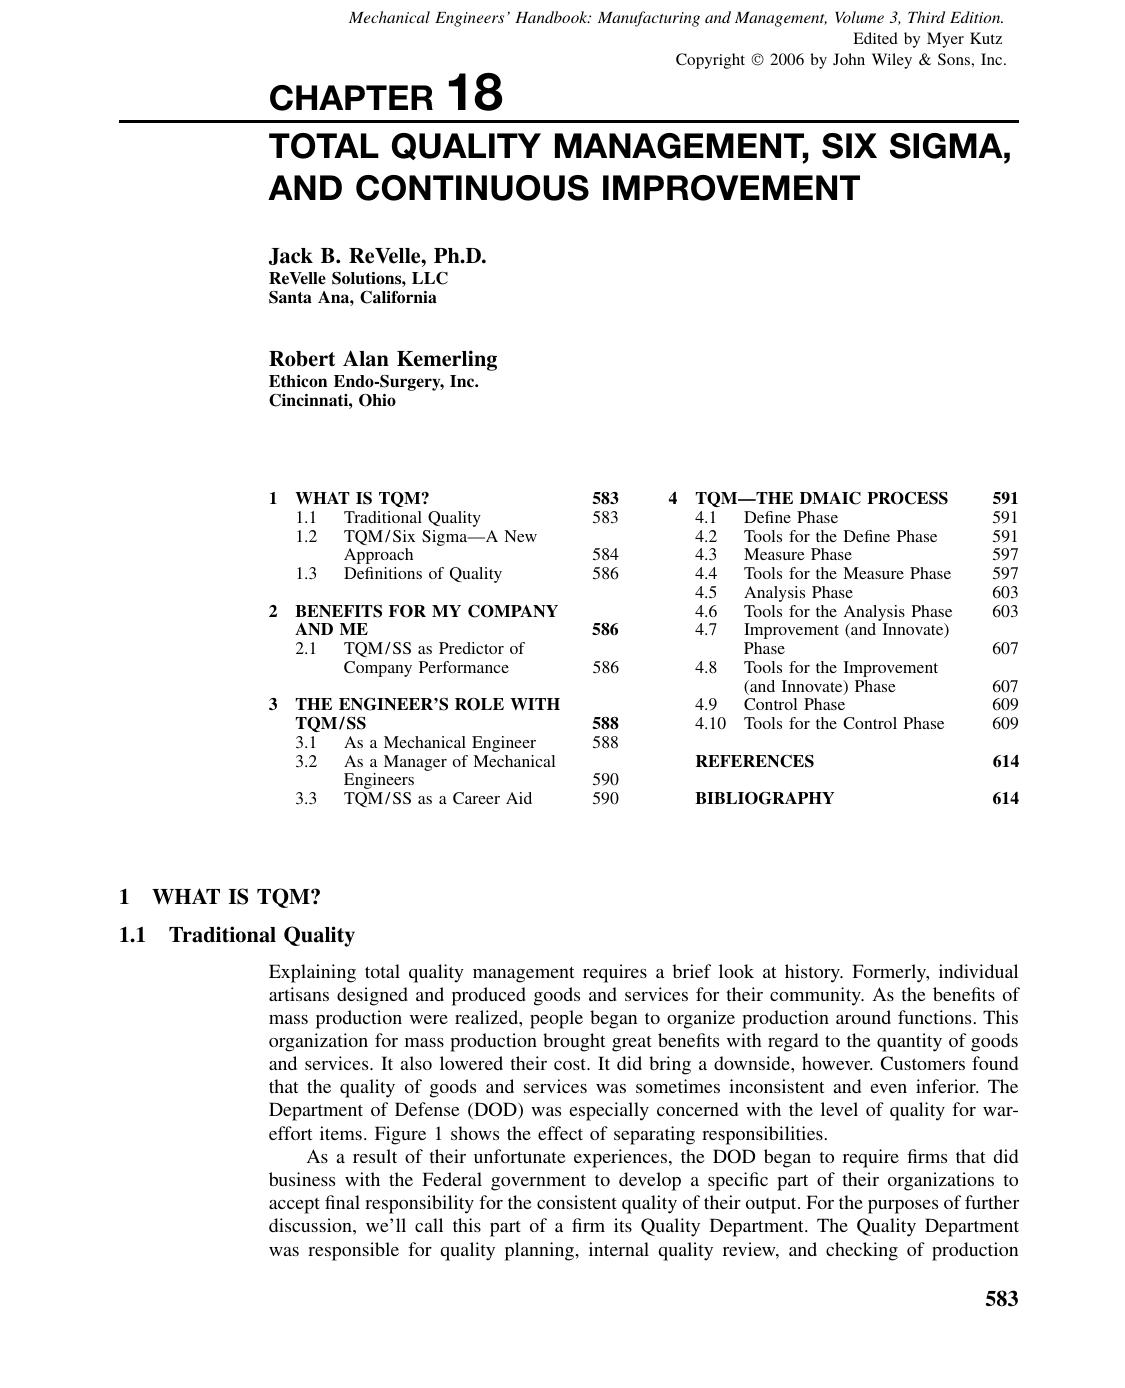 Total Quality Management, Six Sigma, and Continuous Improvement by penta